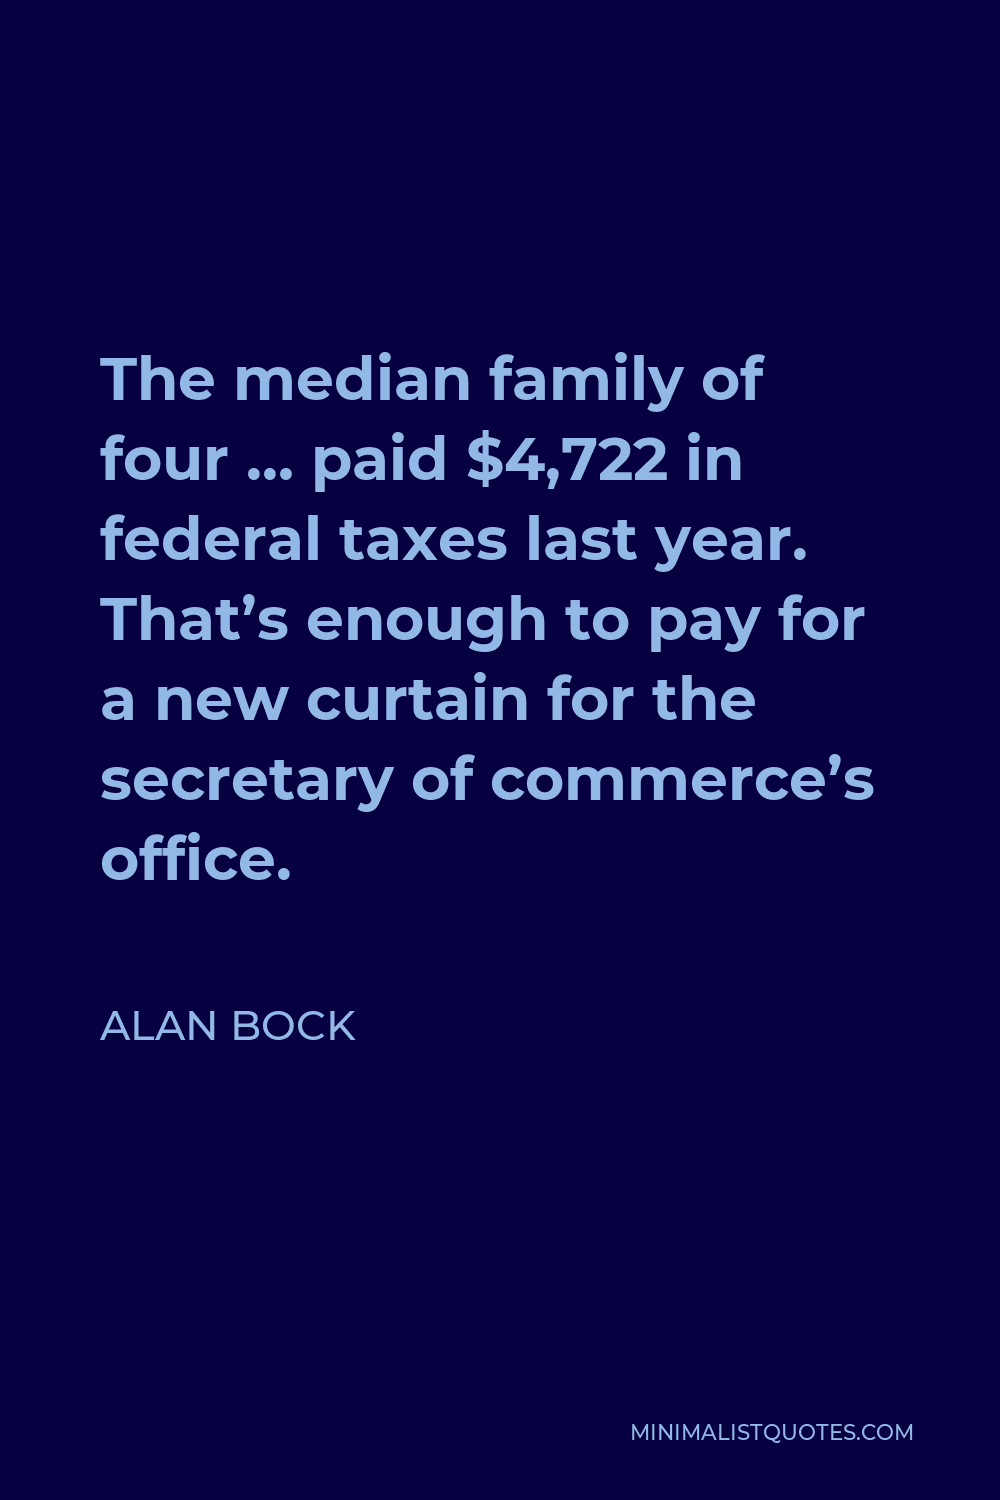 Alan Bock Quote - The median family of four … paid $4,722 in federal taxes last year. That’s enough to pay for a new curtain for the secretary of commerce’s office.